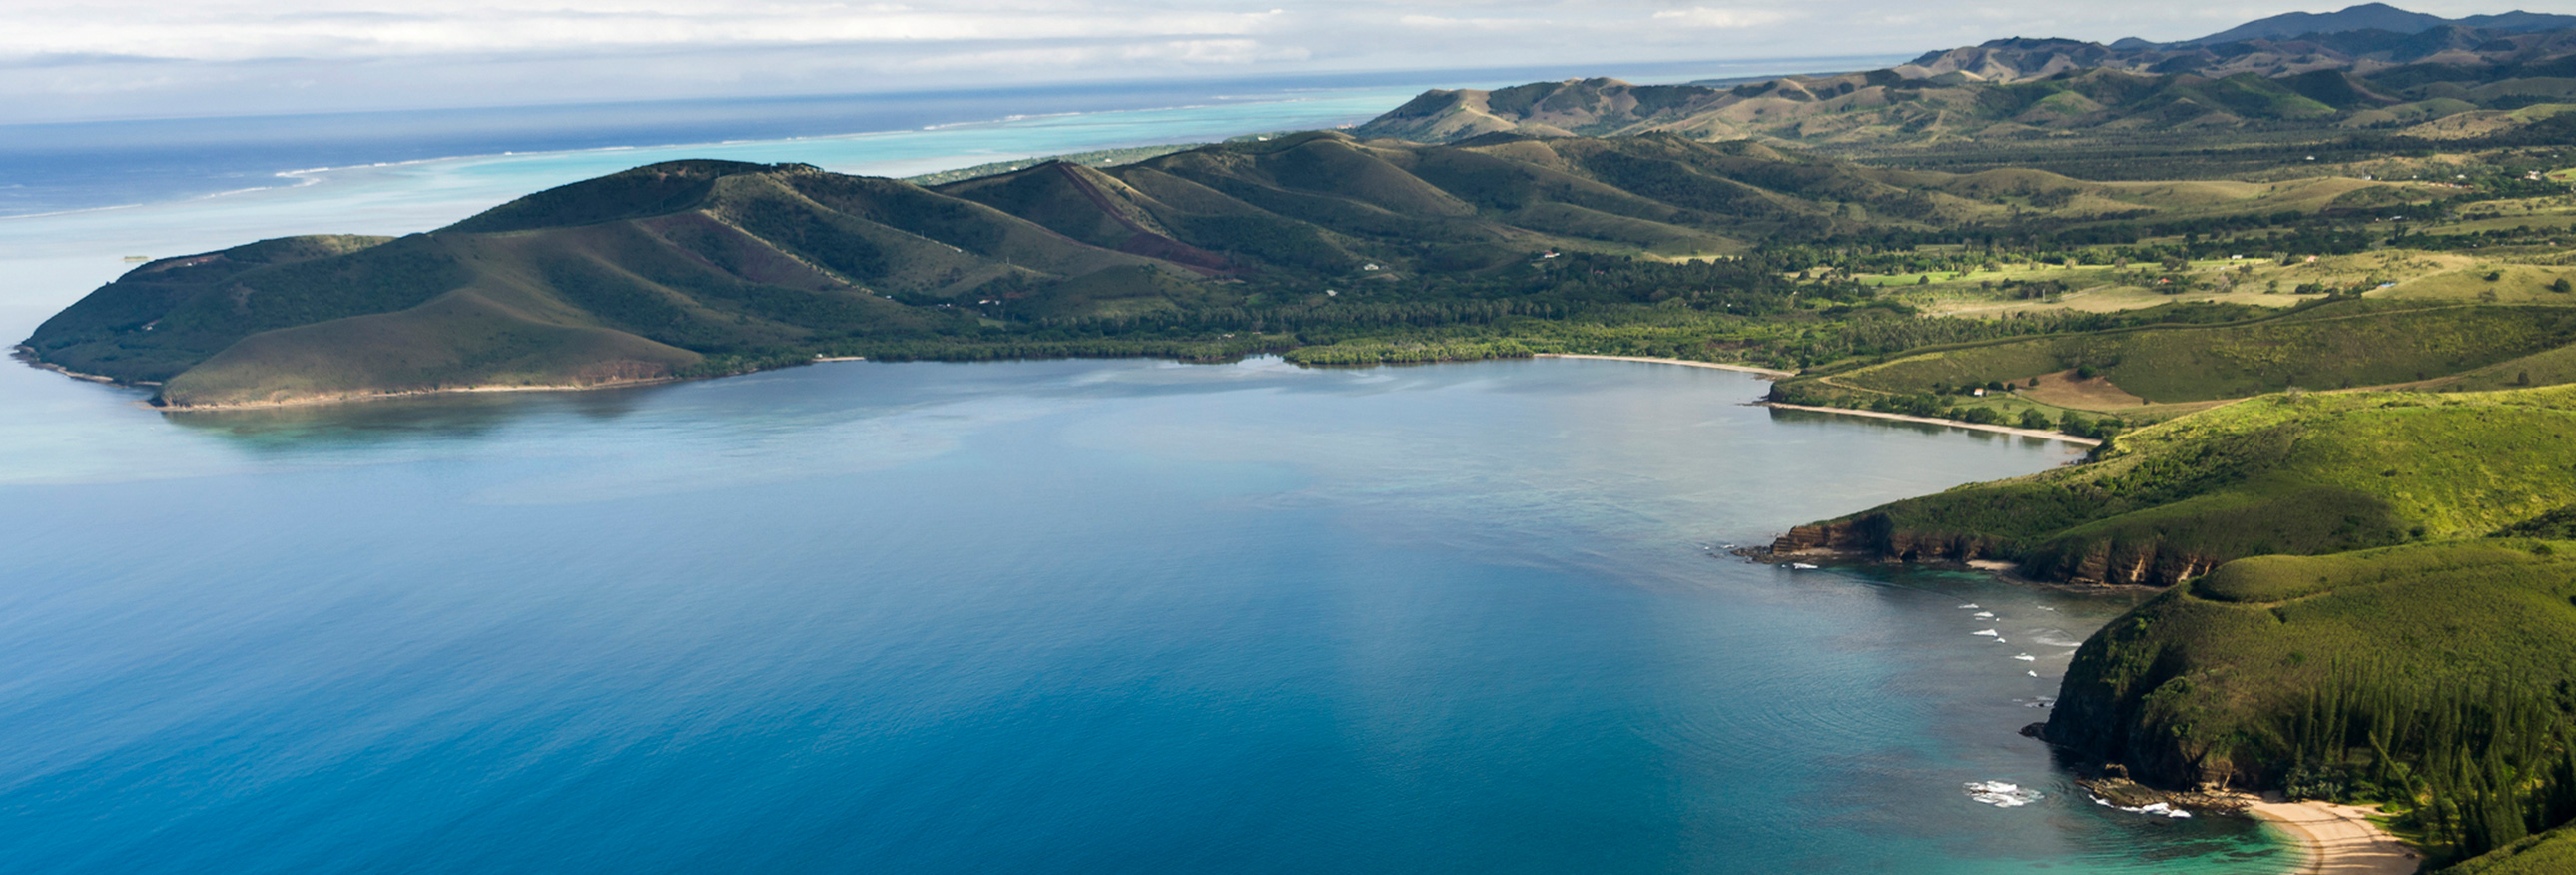 aerial view of New Caledonia